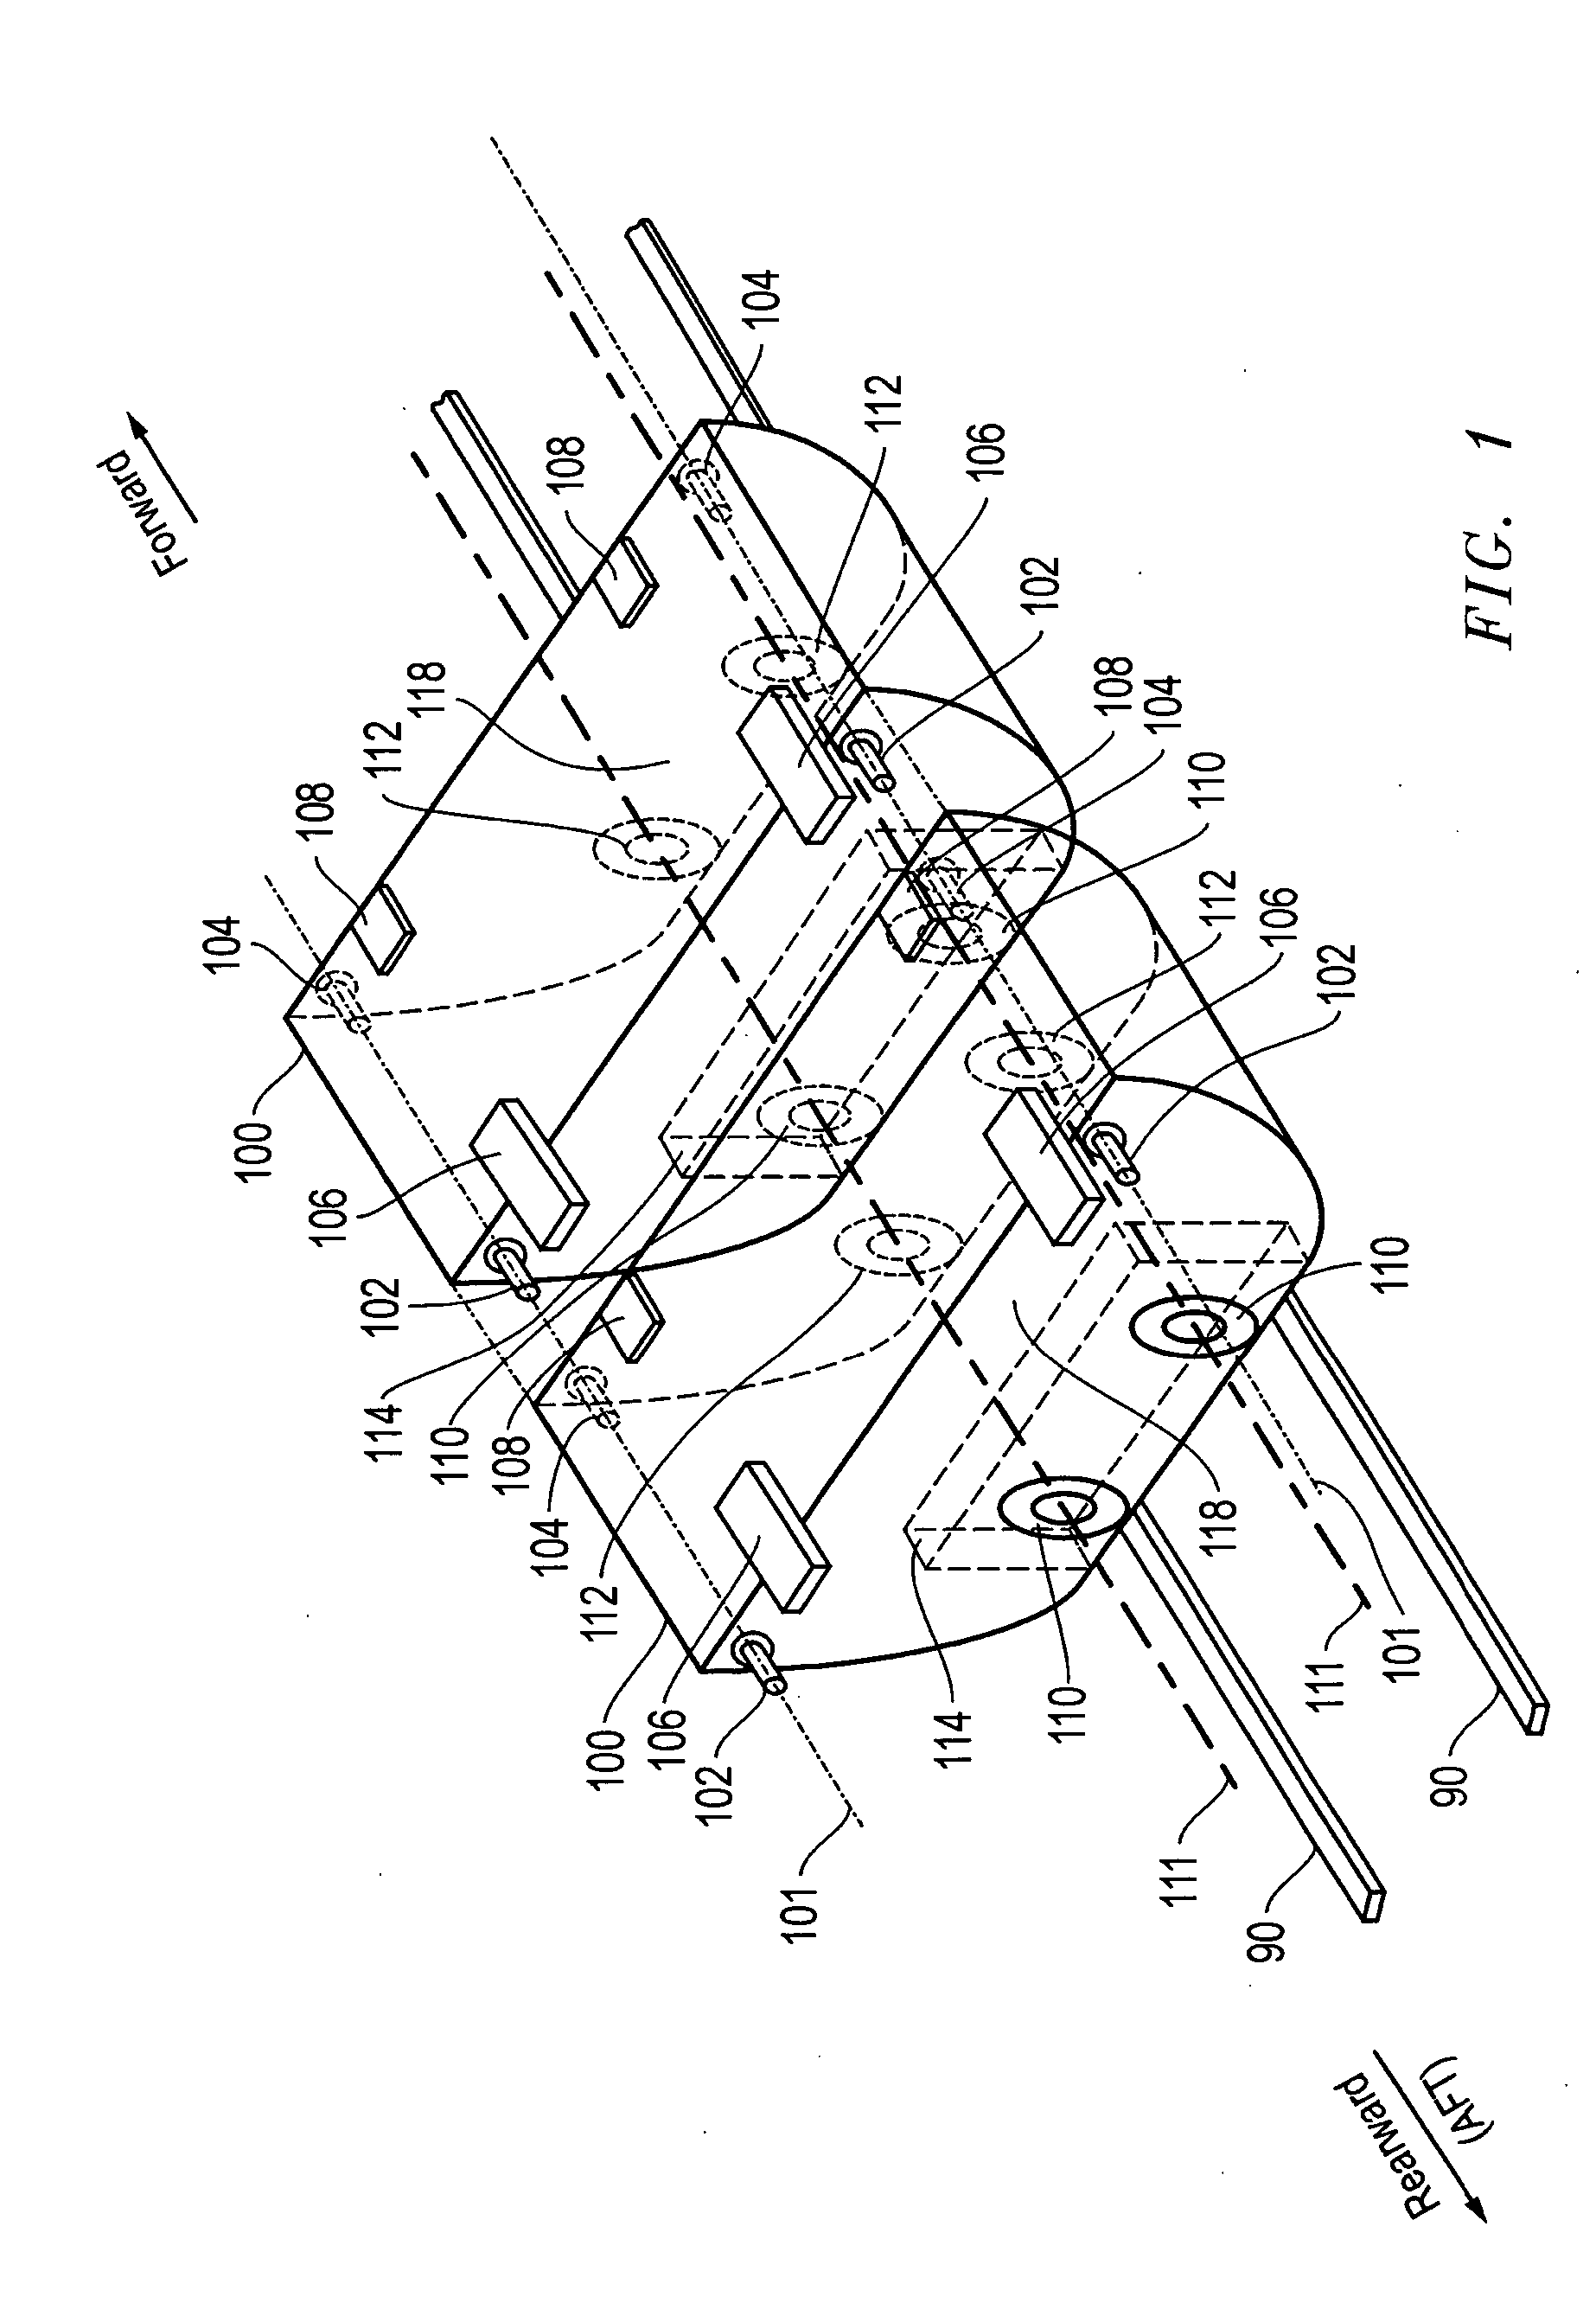 Systems and methods for aerial dispersion of materials